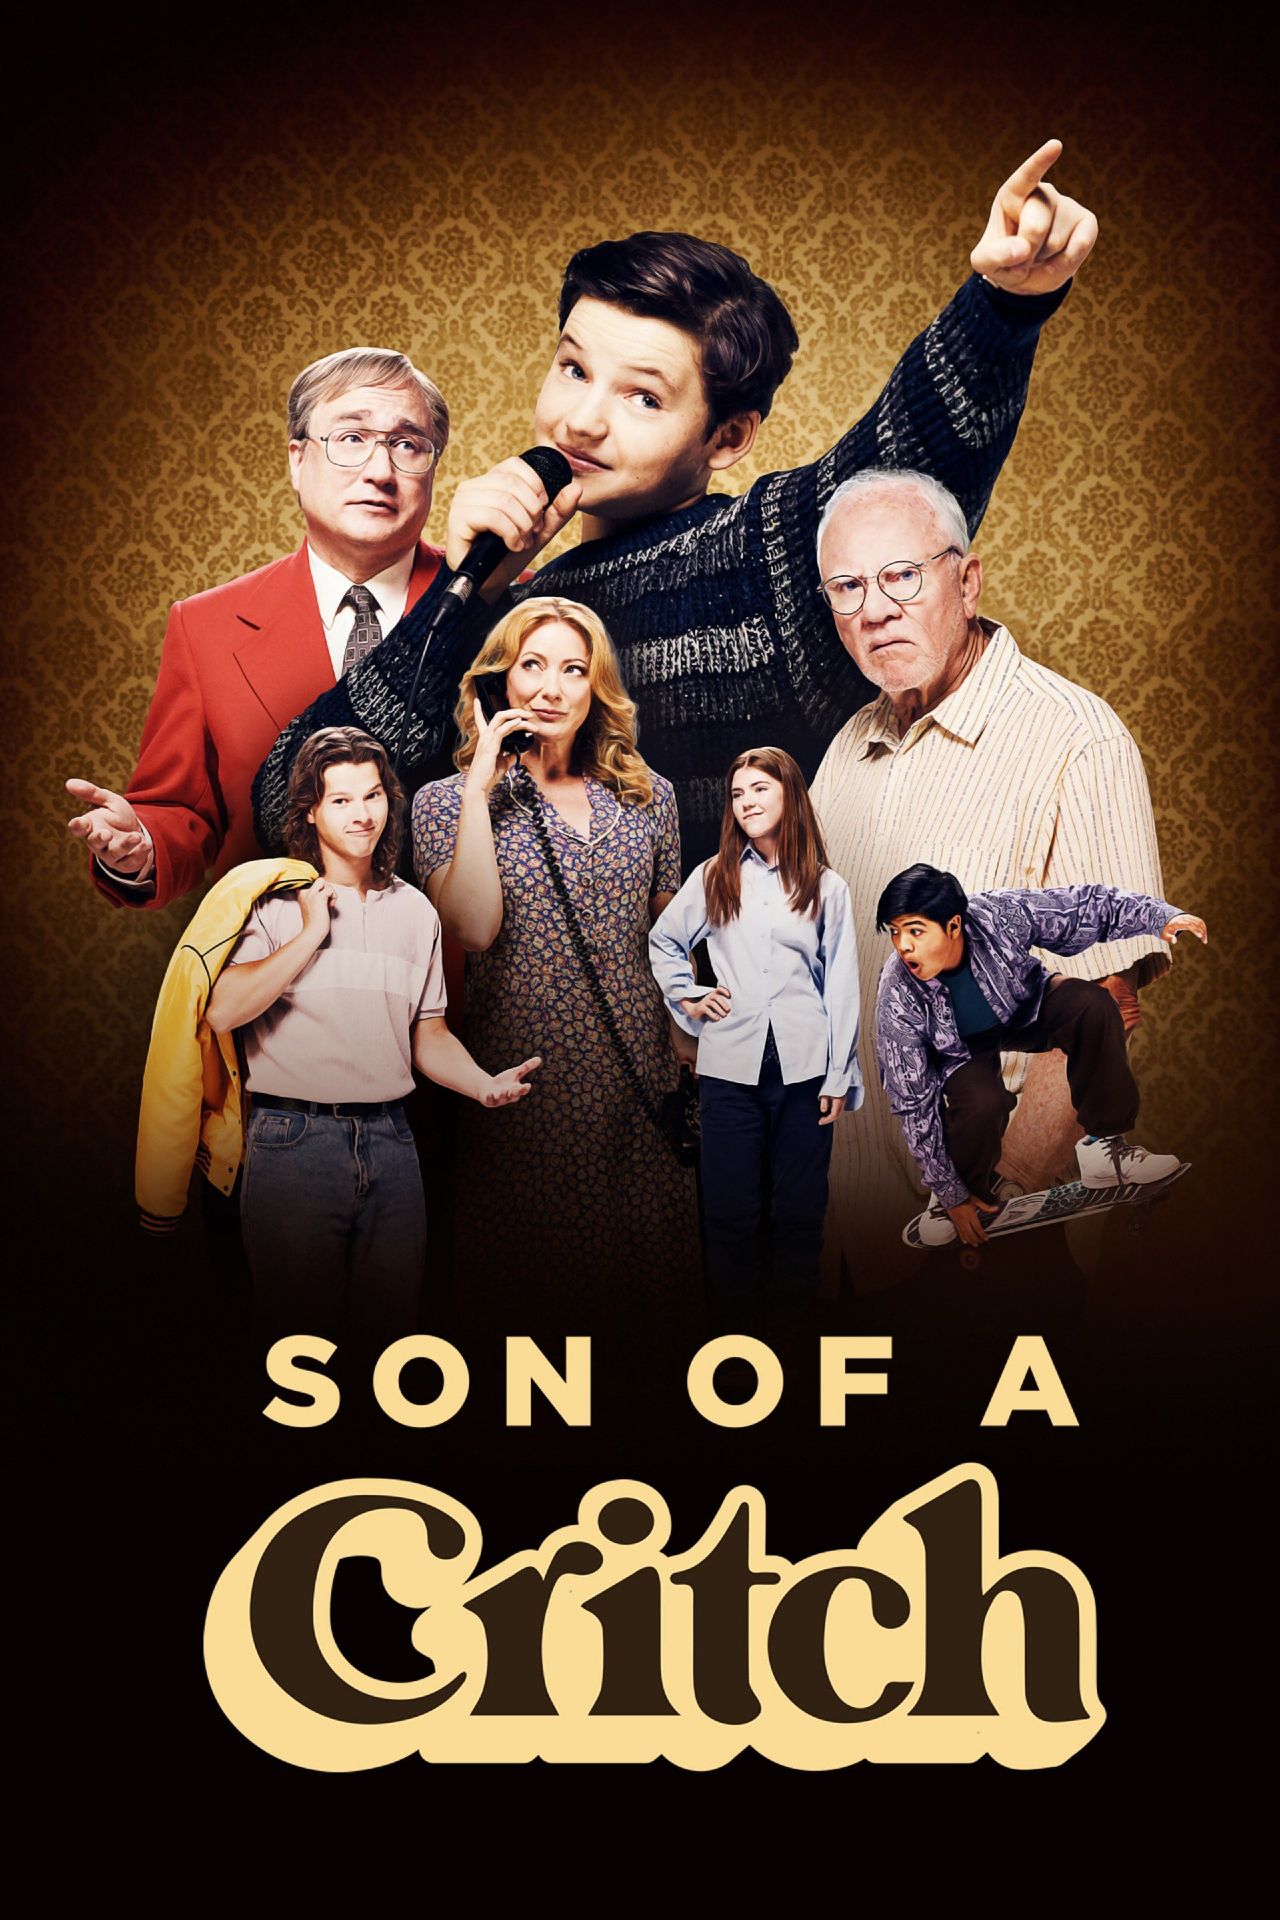 Son of a Critch TV Poster